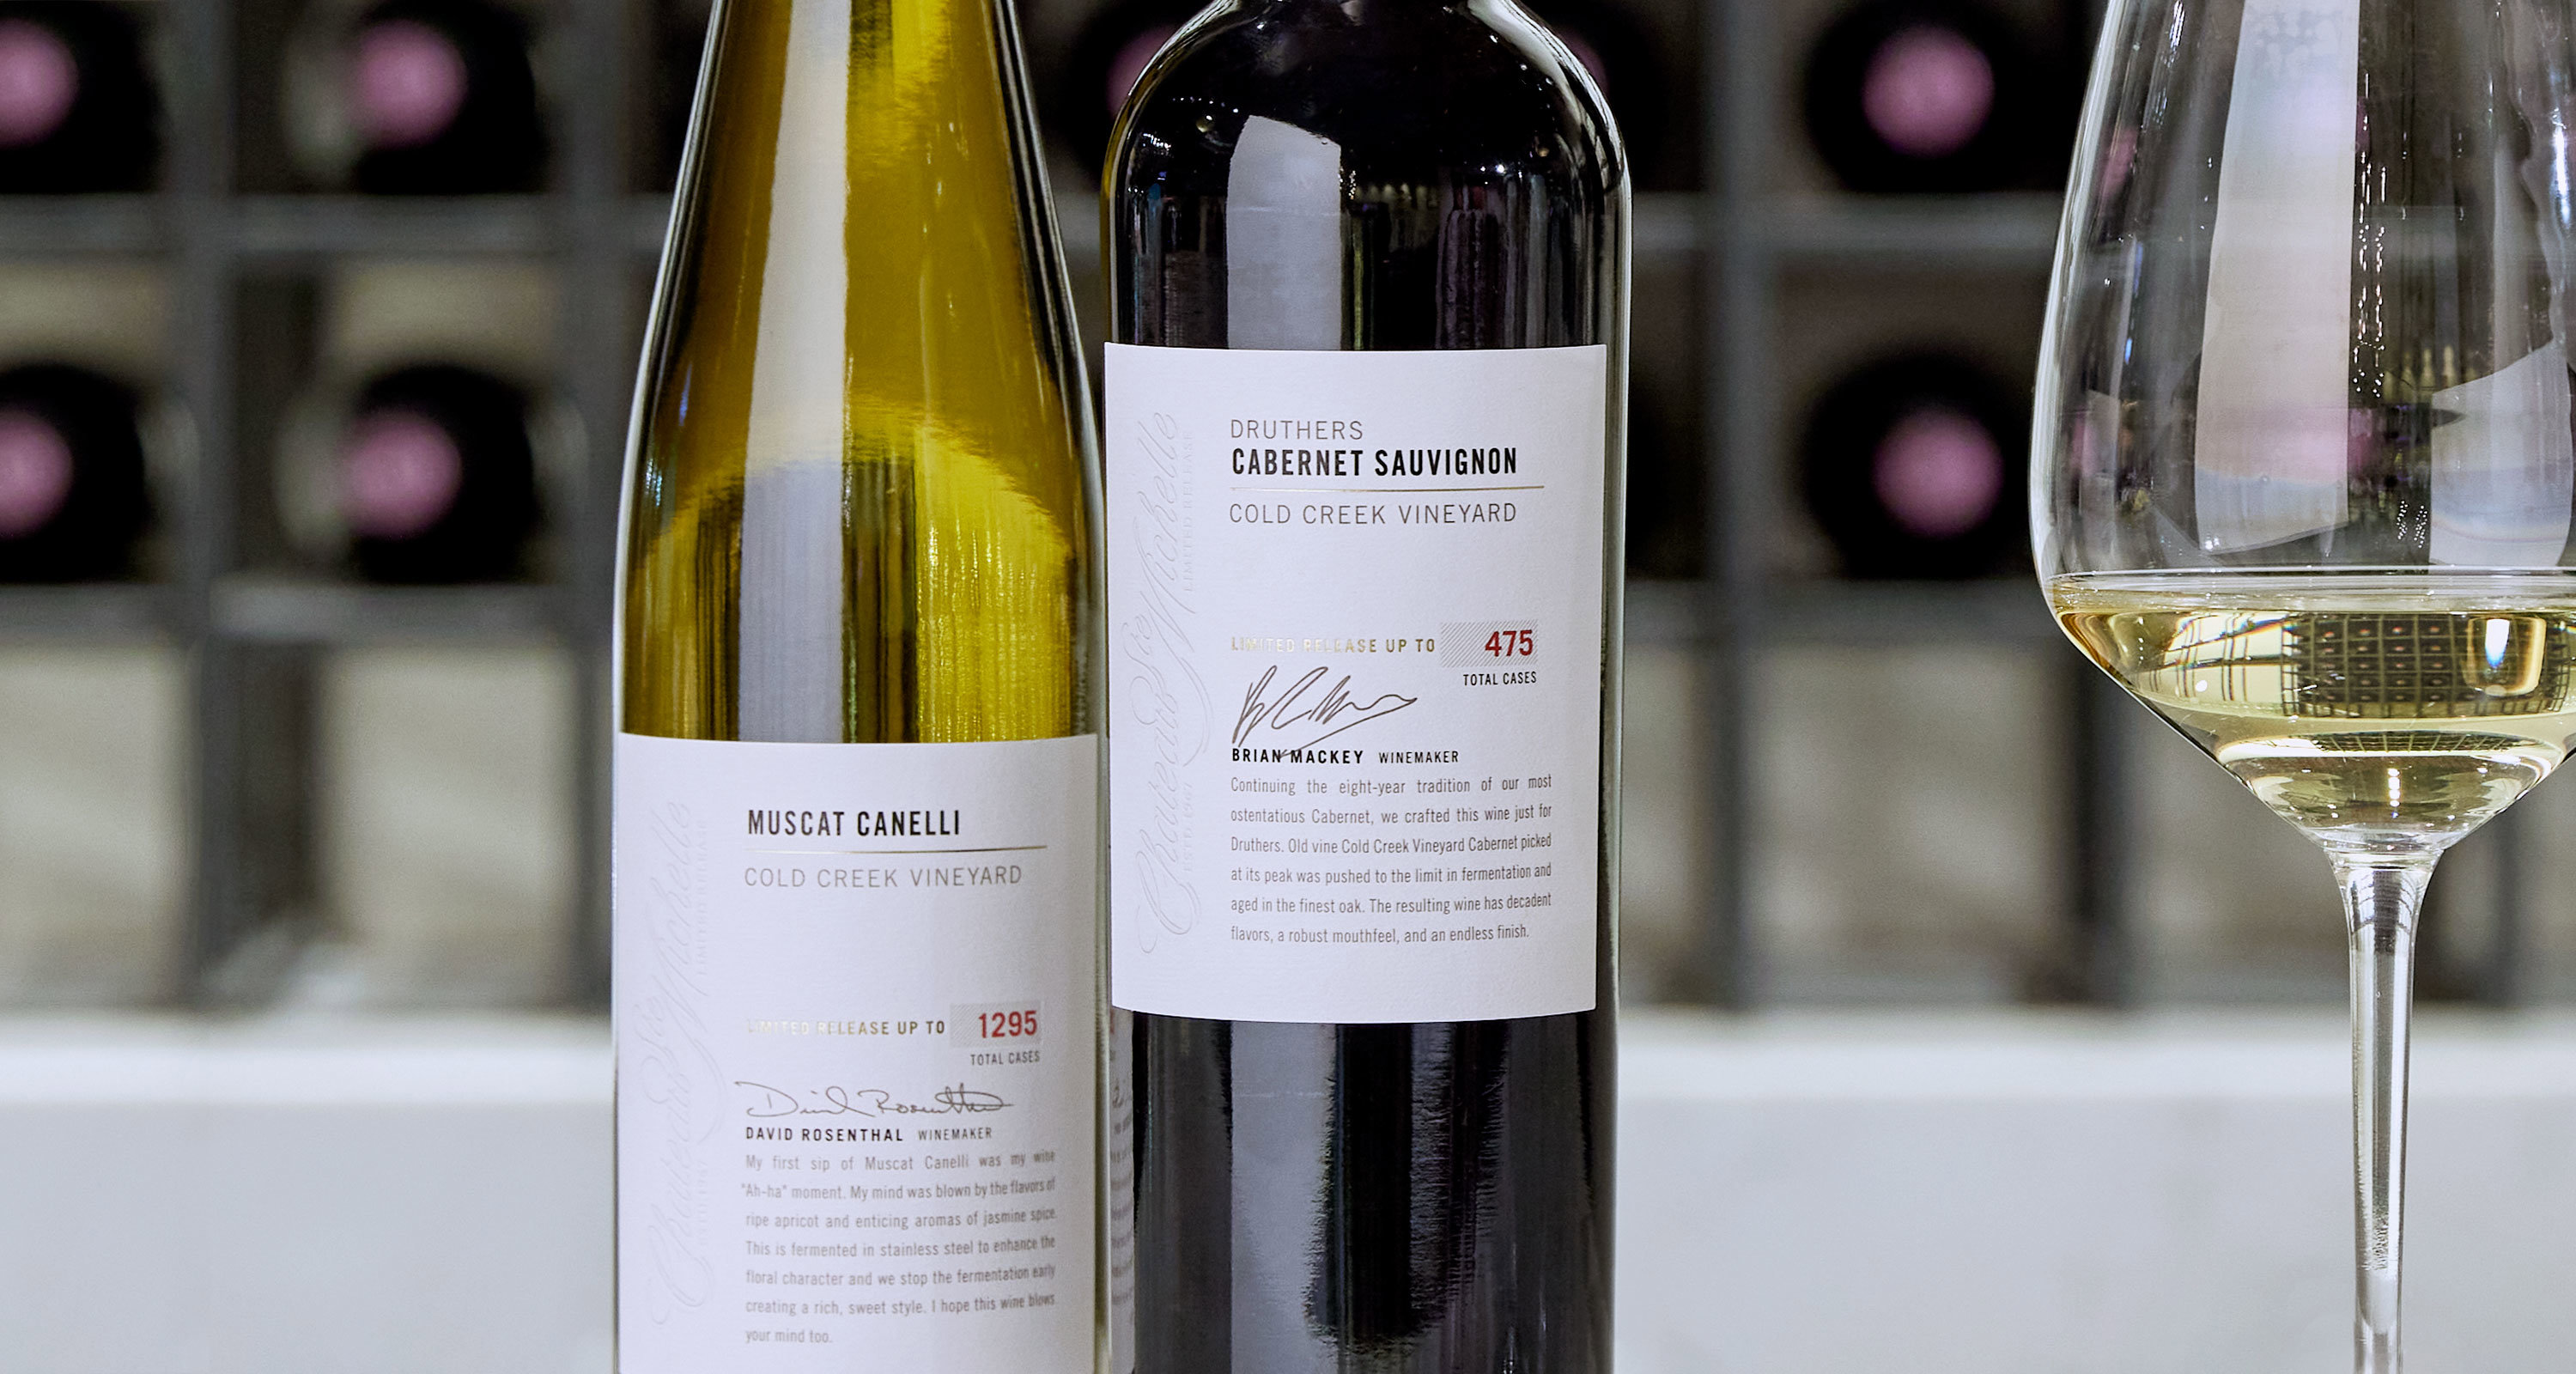 Bottles of Limited Release wine